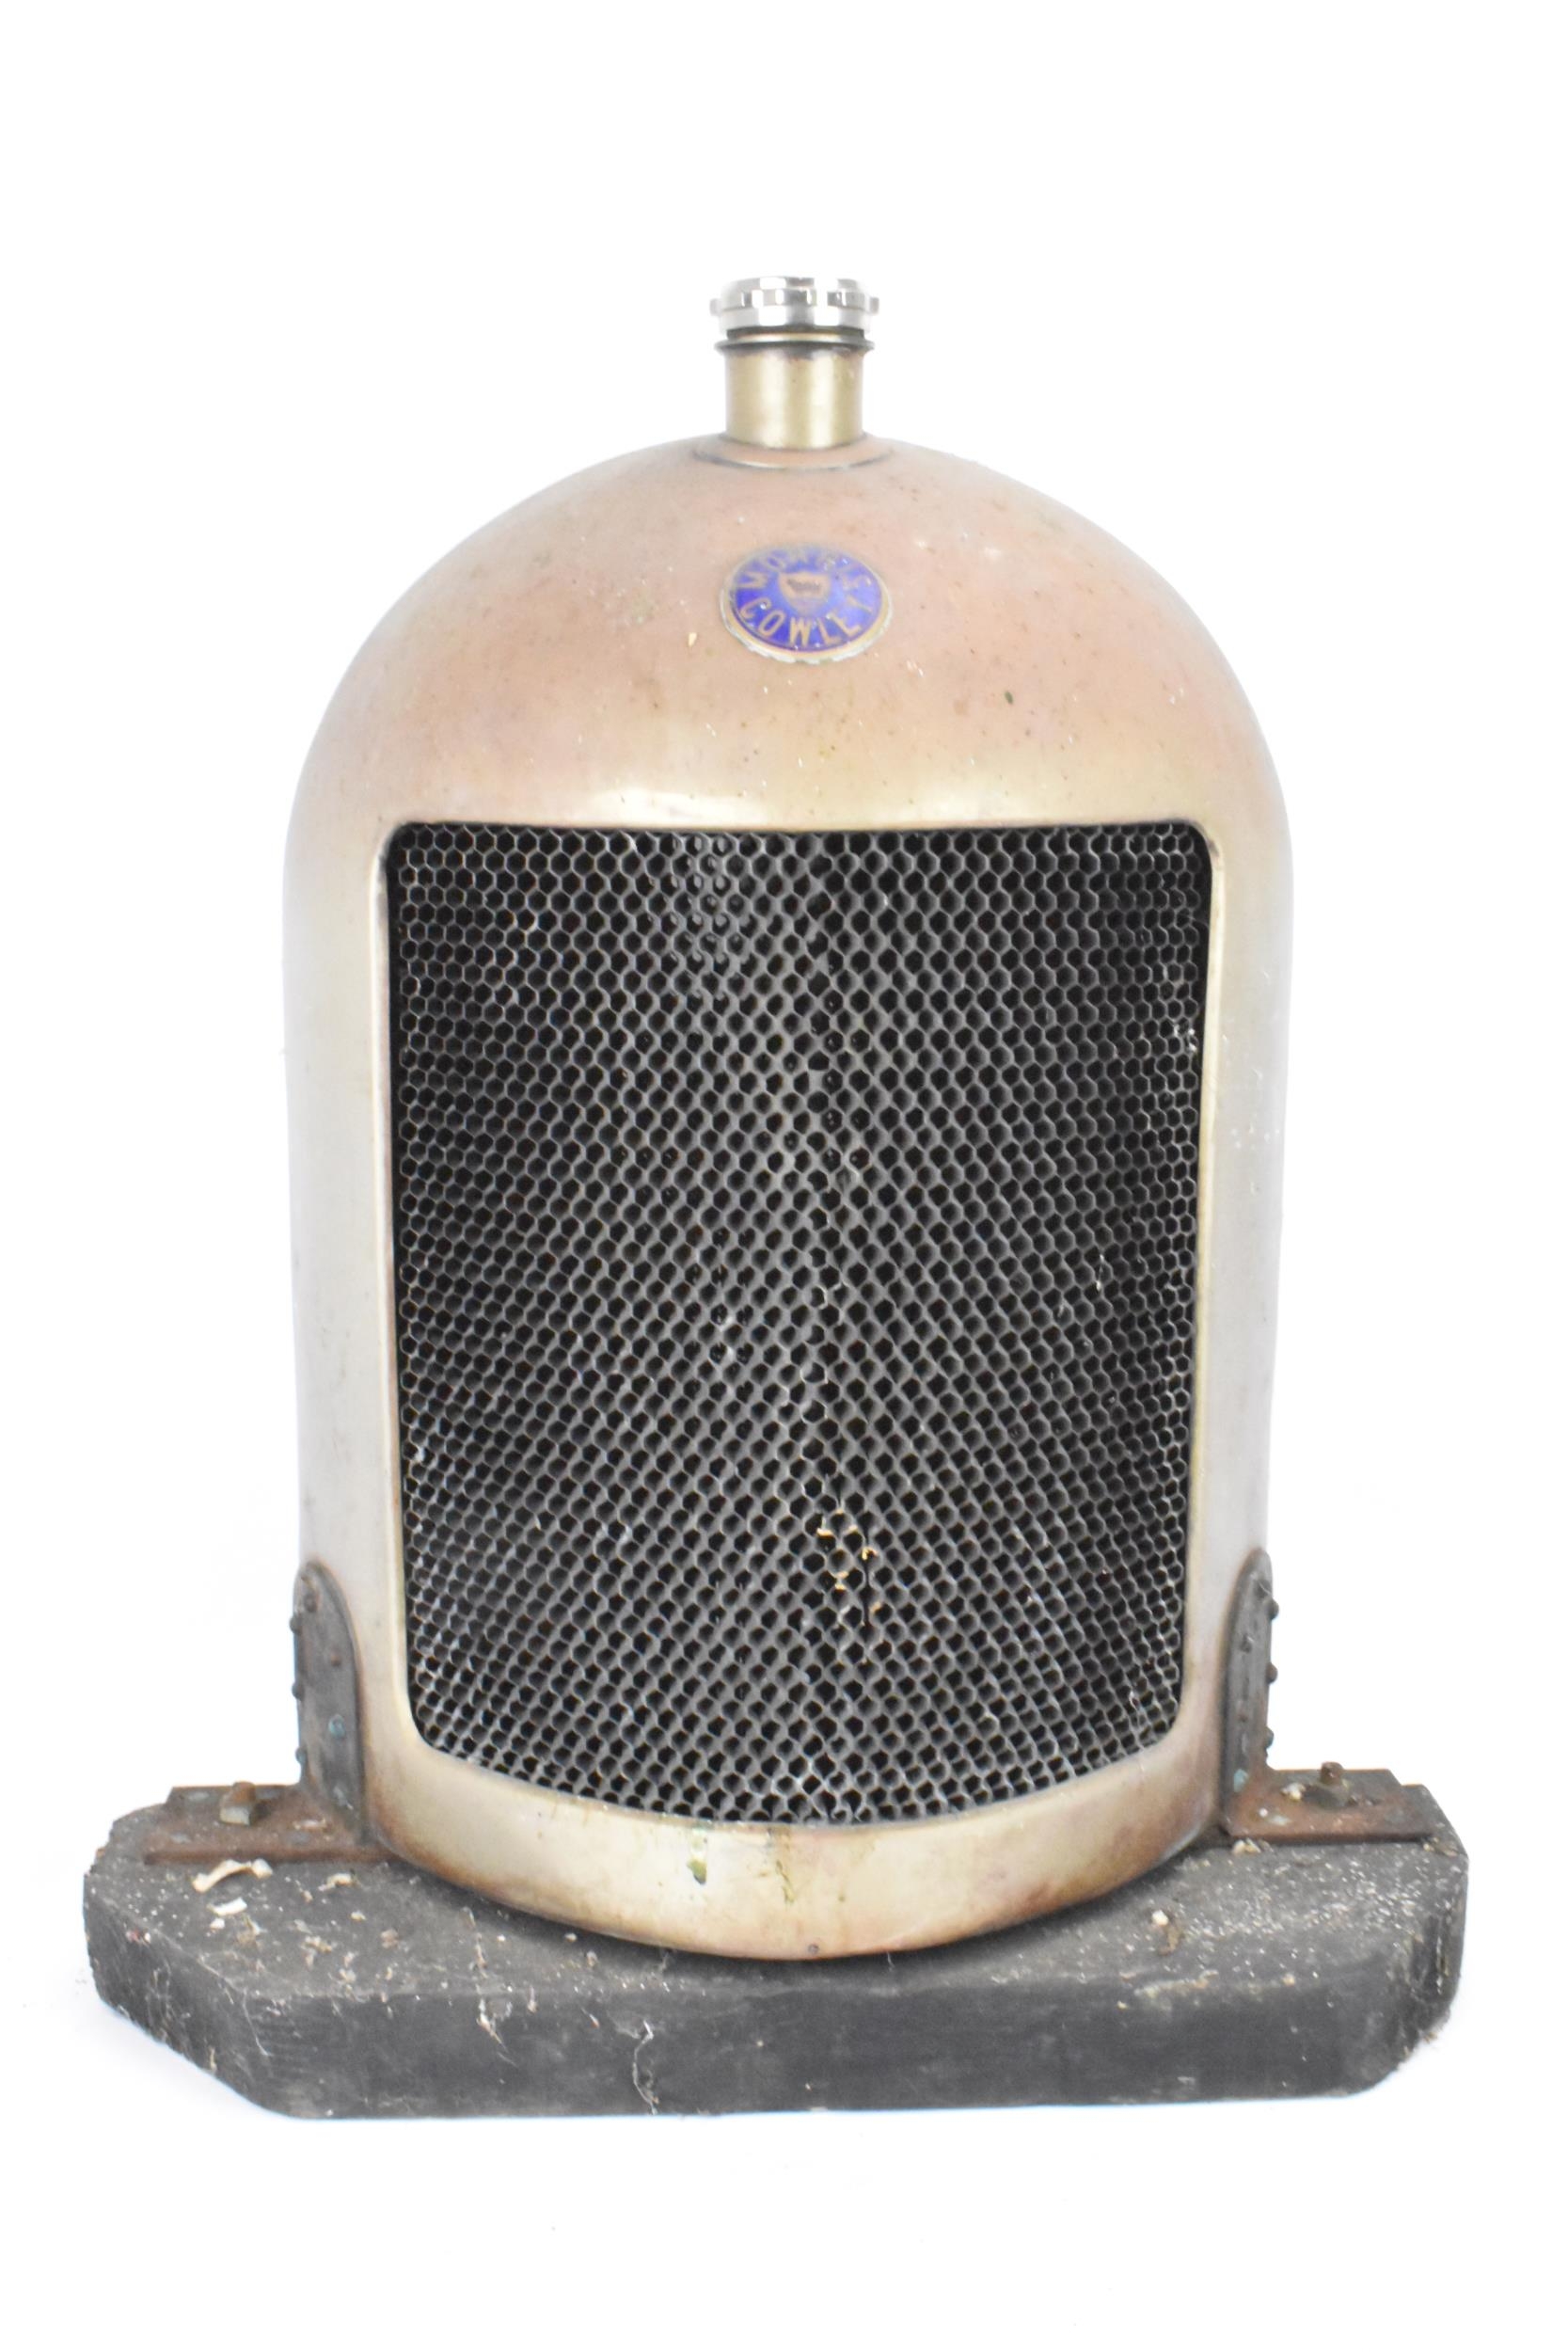 A Morris Cowley 'Bullnose' radiator, circa 1920s, nickel plated surround with blue enamel badge, a